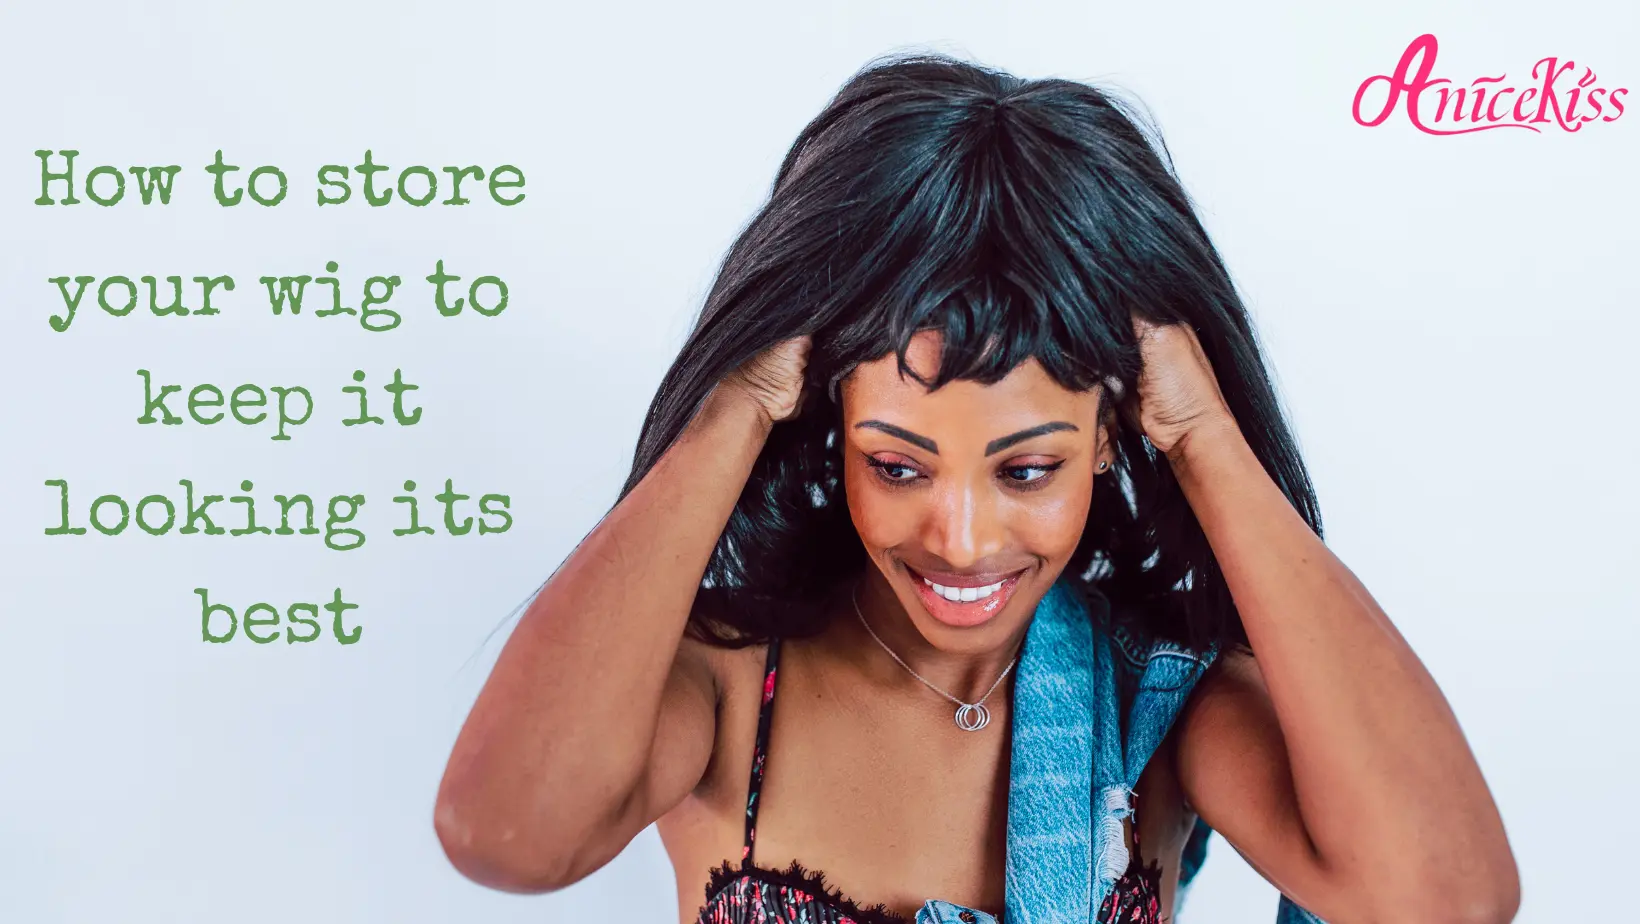 How to store your wig to keep it looking its best